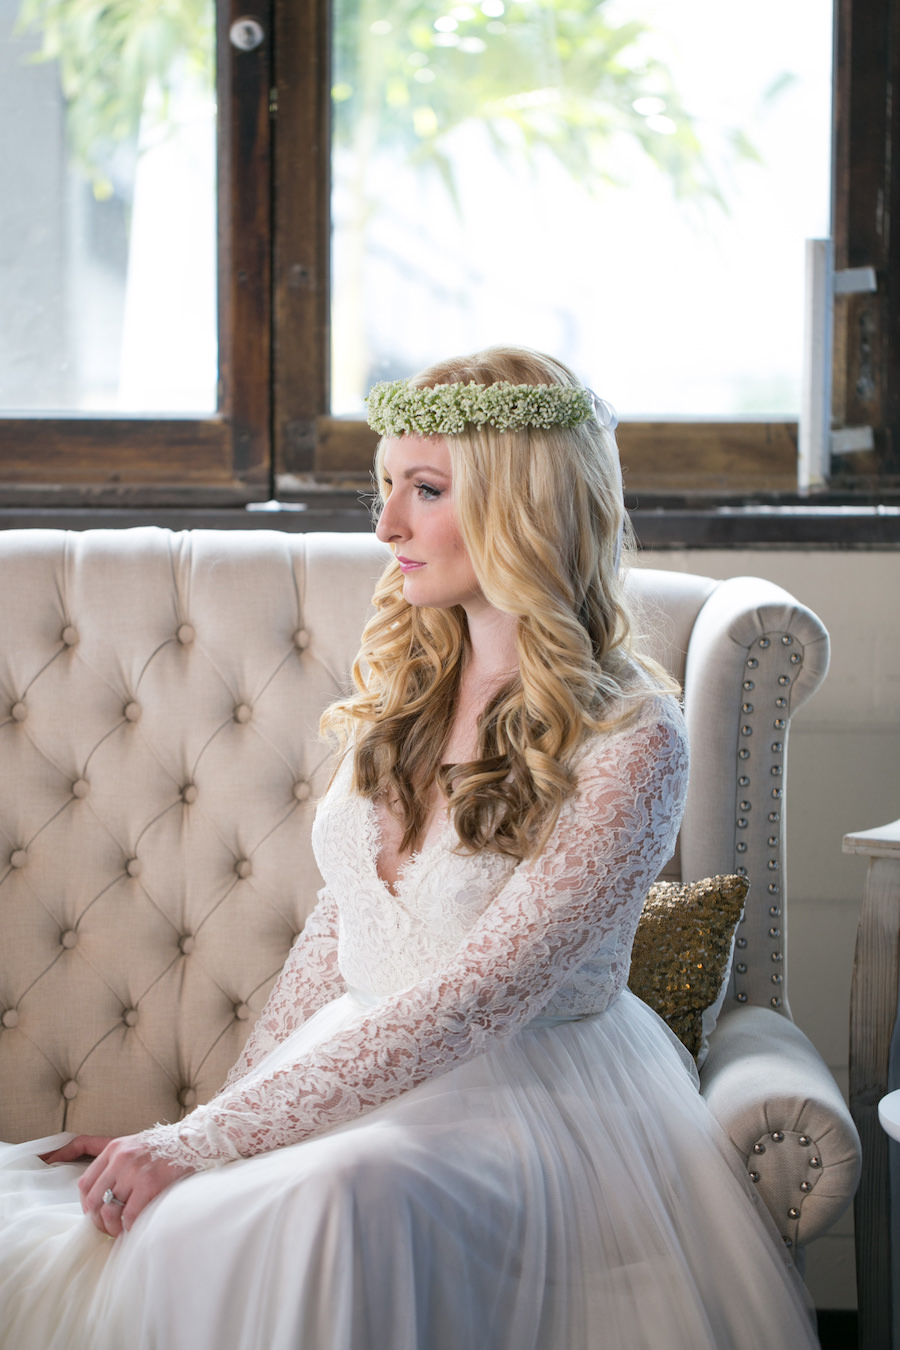 Vintage Tufted Upholstered Couch and Boho Bride with Baby's Breath Floral Crown | Long Sleeved Lace Wedding Dress from the The Bride Tampa | Boho Wedding Reception Decor Ideas and Inspiration | Tampa Wedding Photographer Carrie Wildes Photography